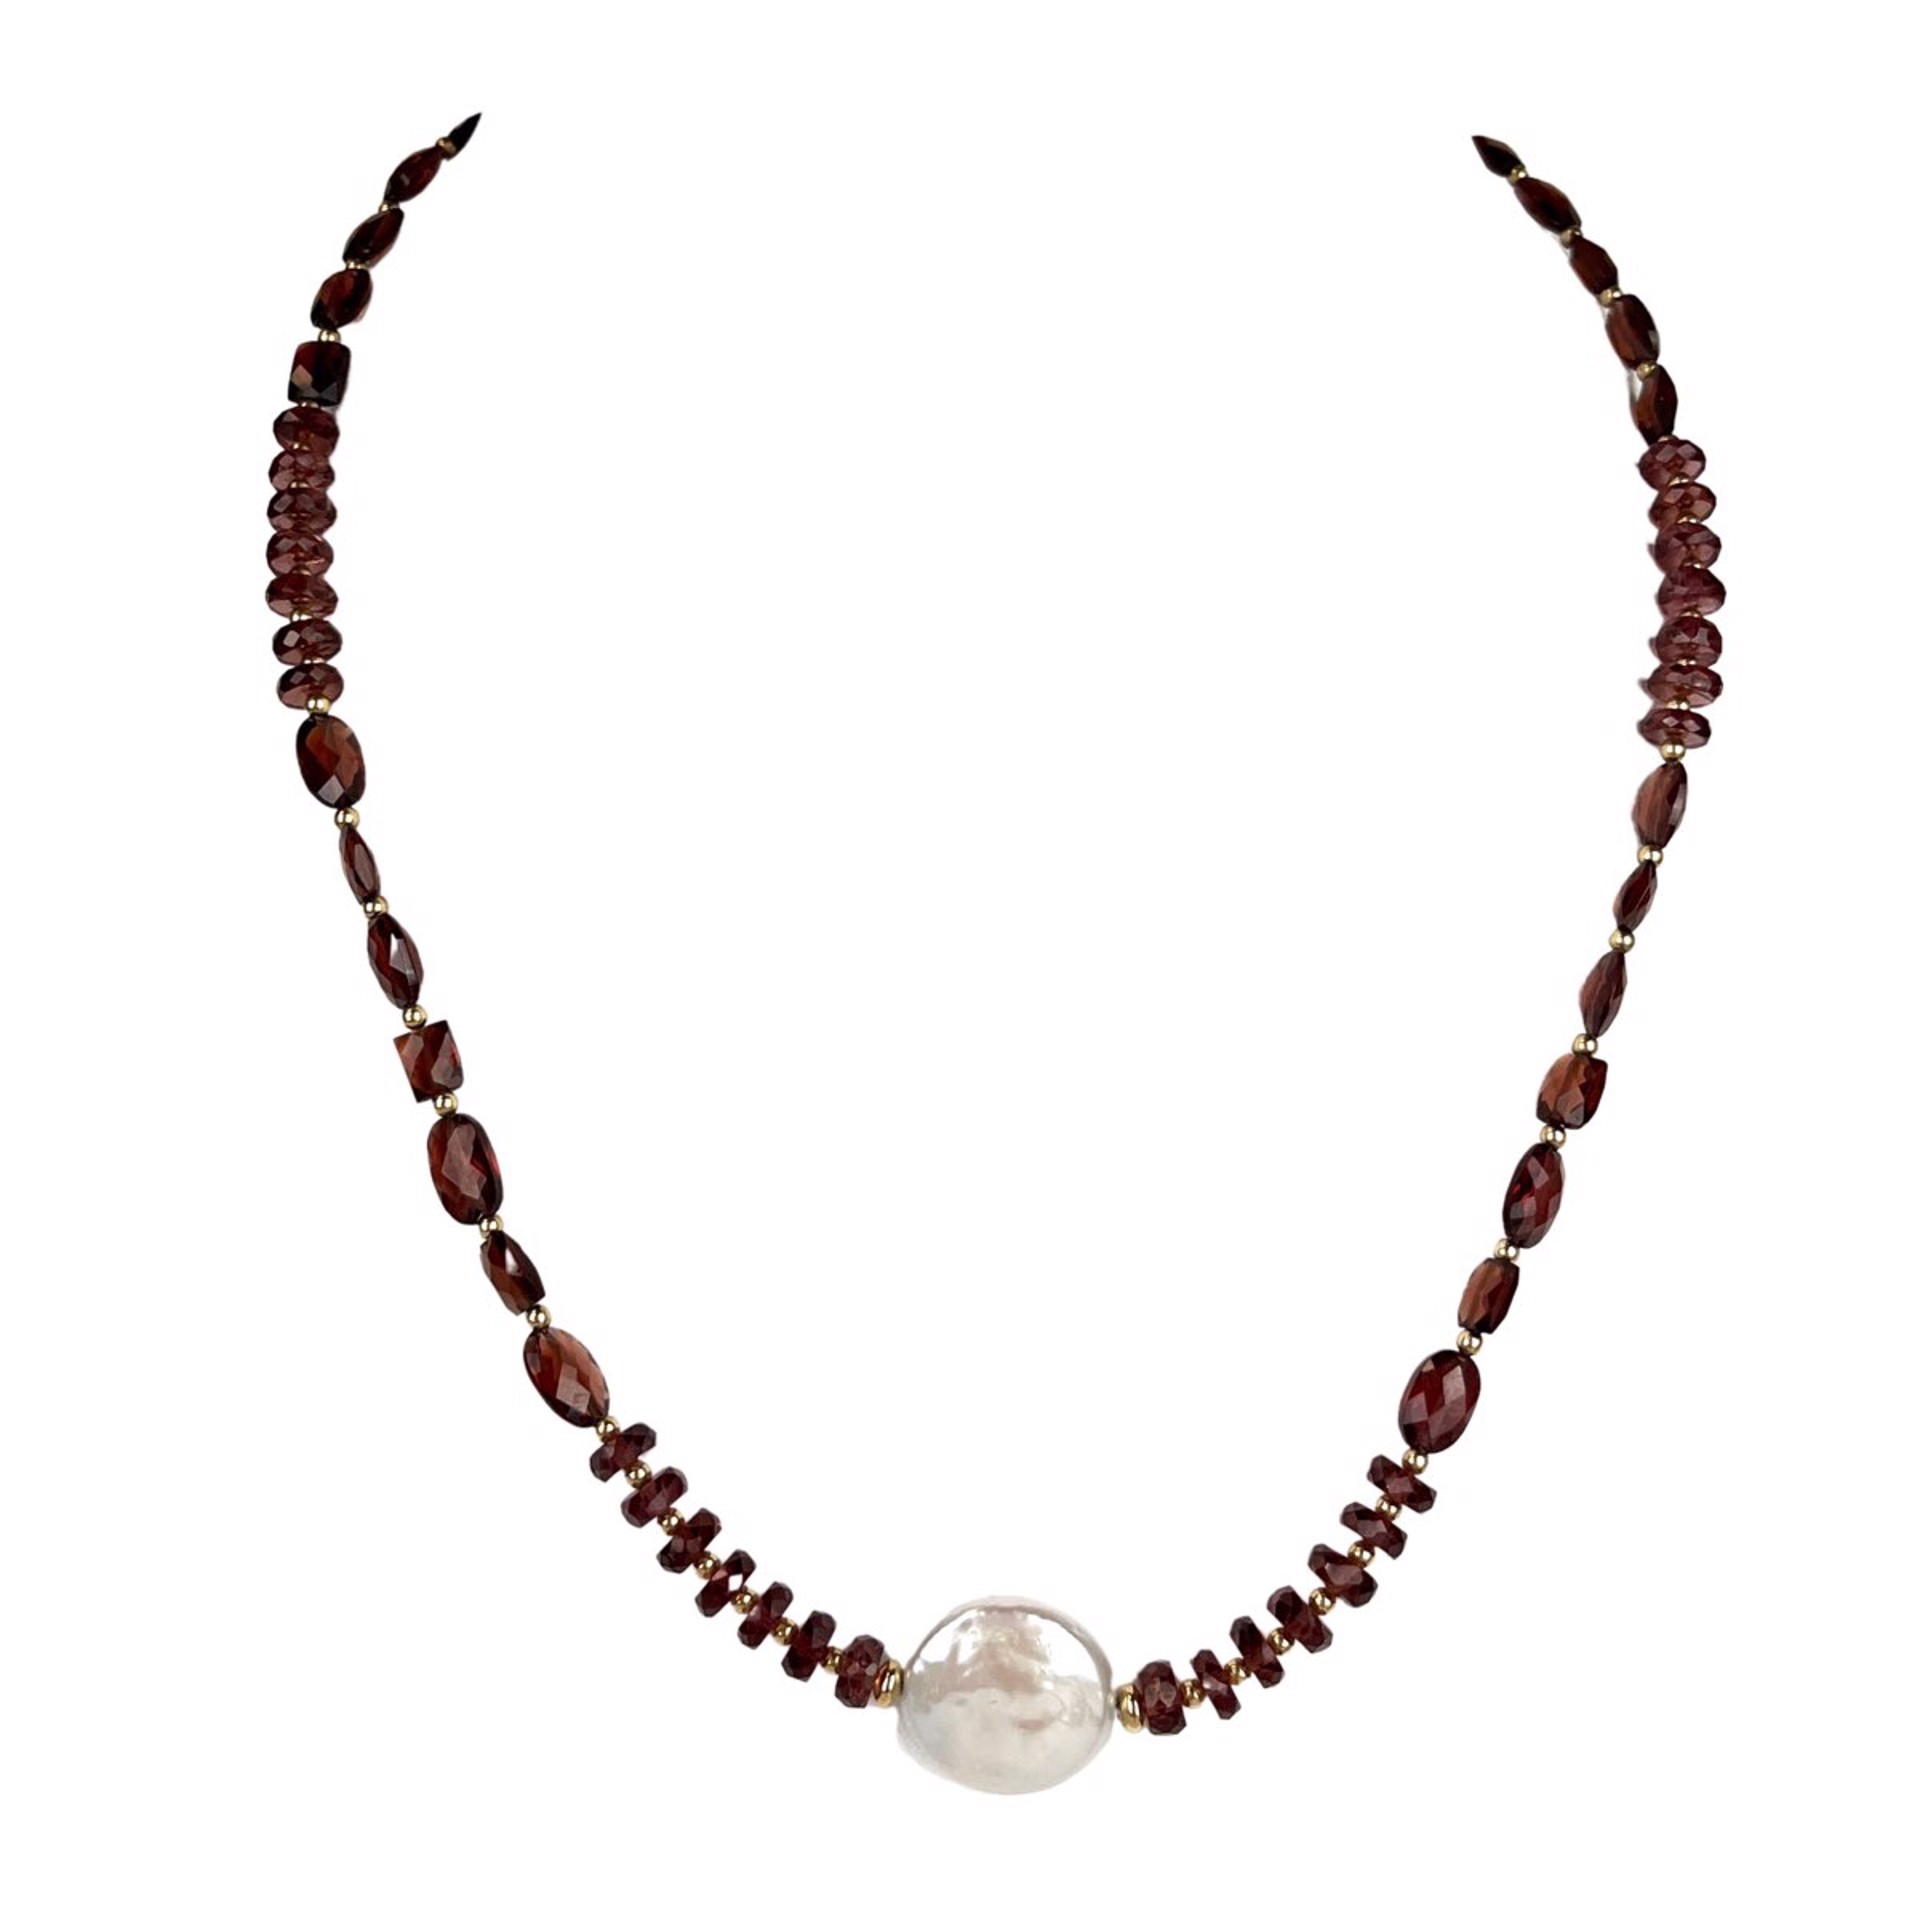 Almandine Garnet with Coin Pearl and 14KGF Necklace by Nola Smodic